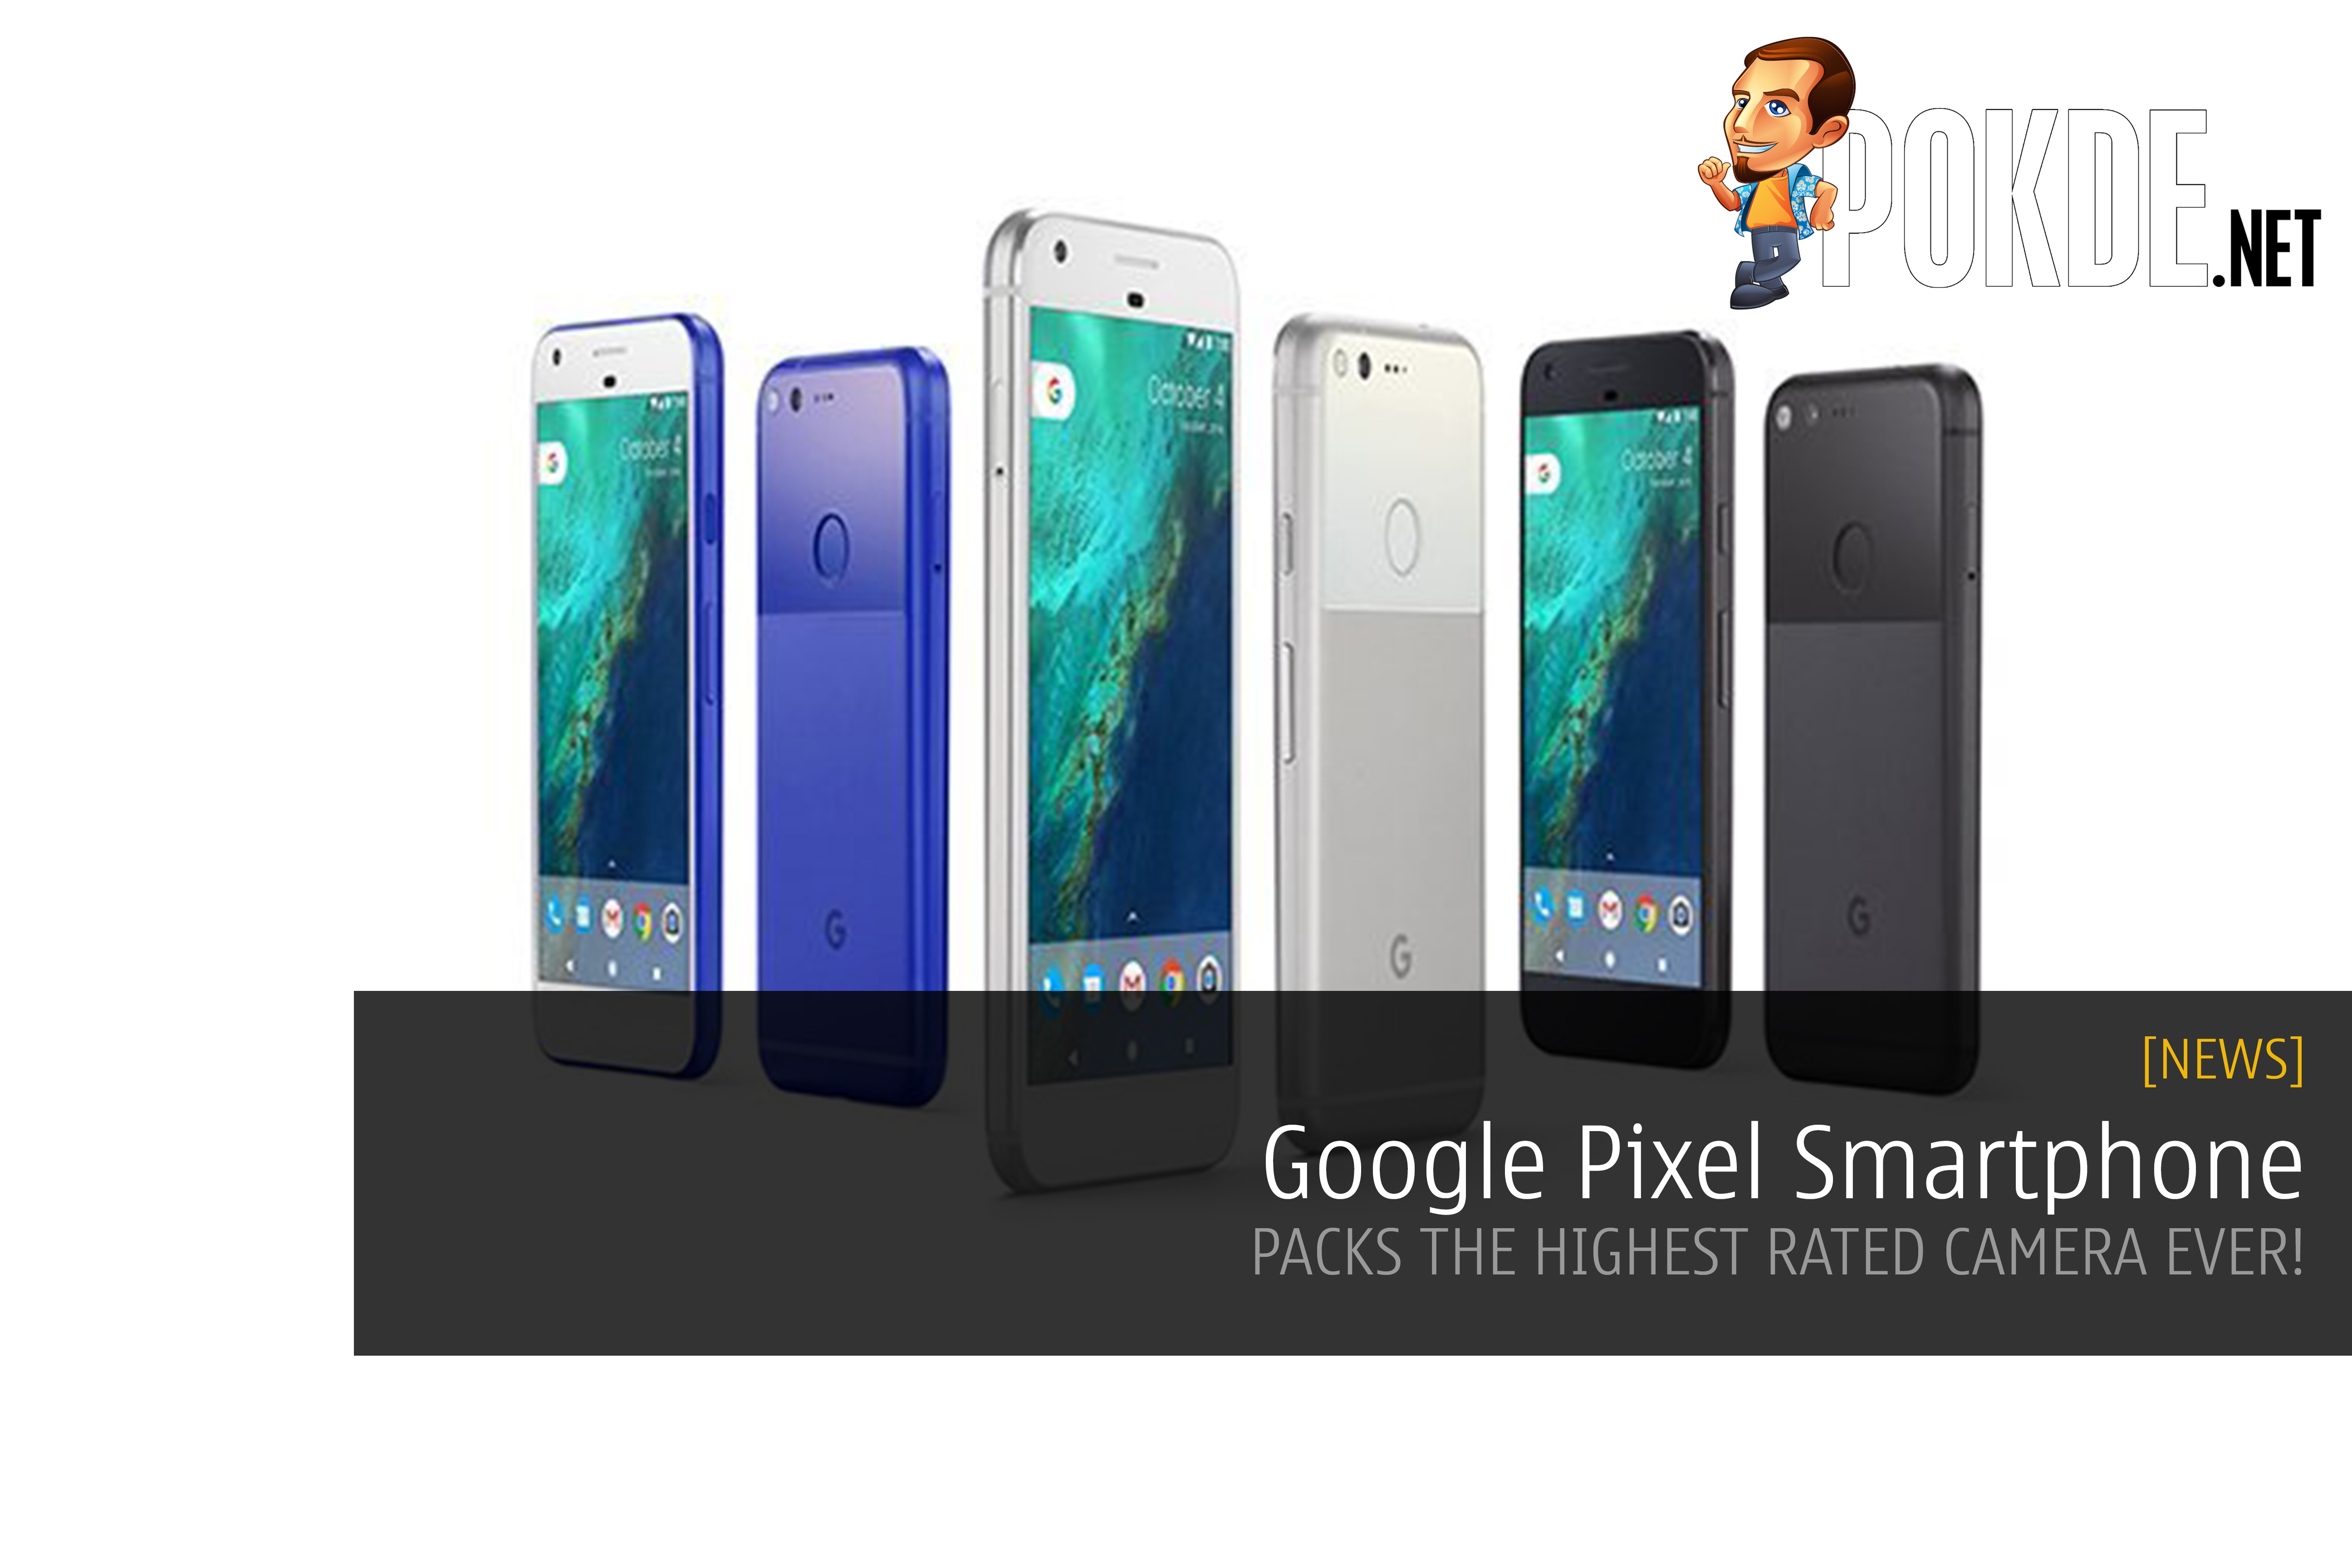 Google Pixel smartphone "made by Google" packs the highest rated camera ever 34